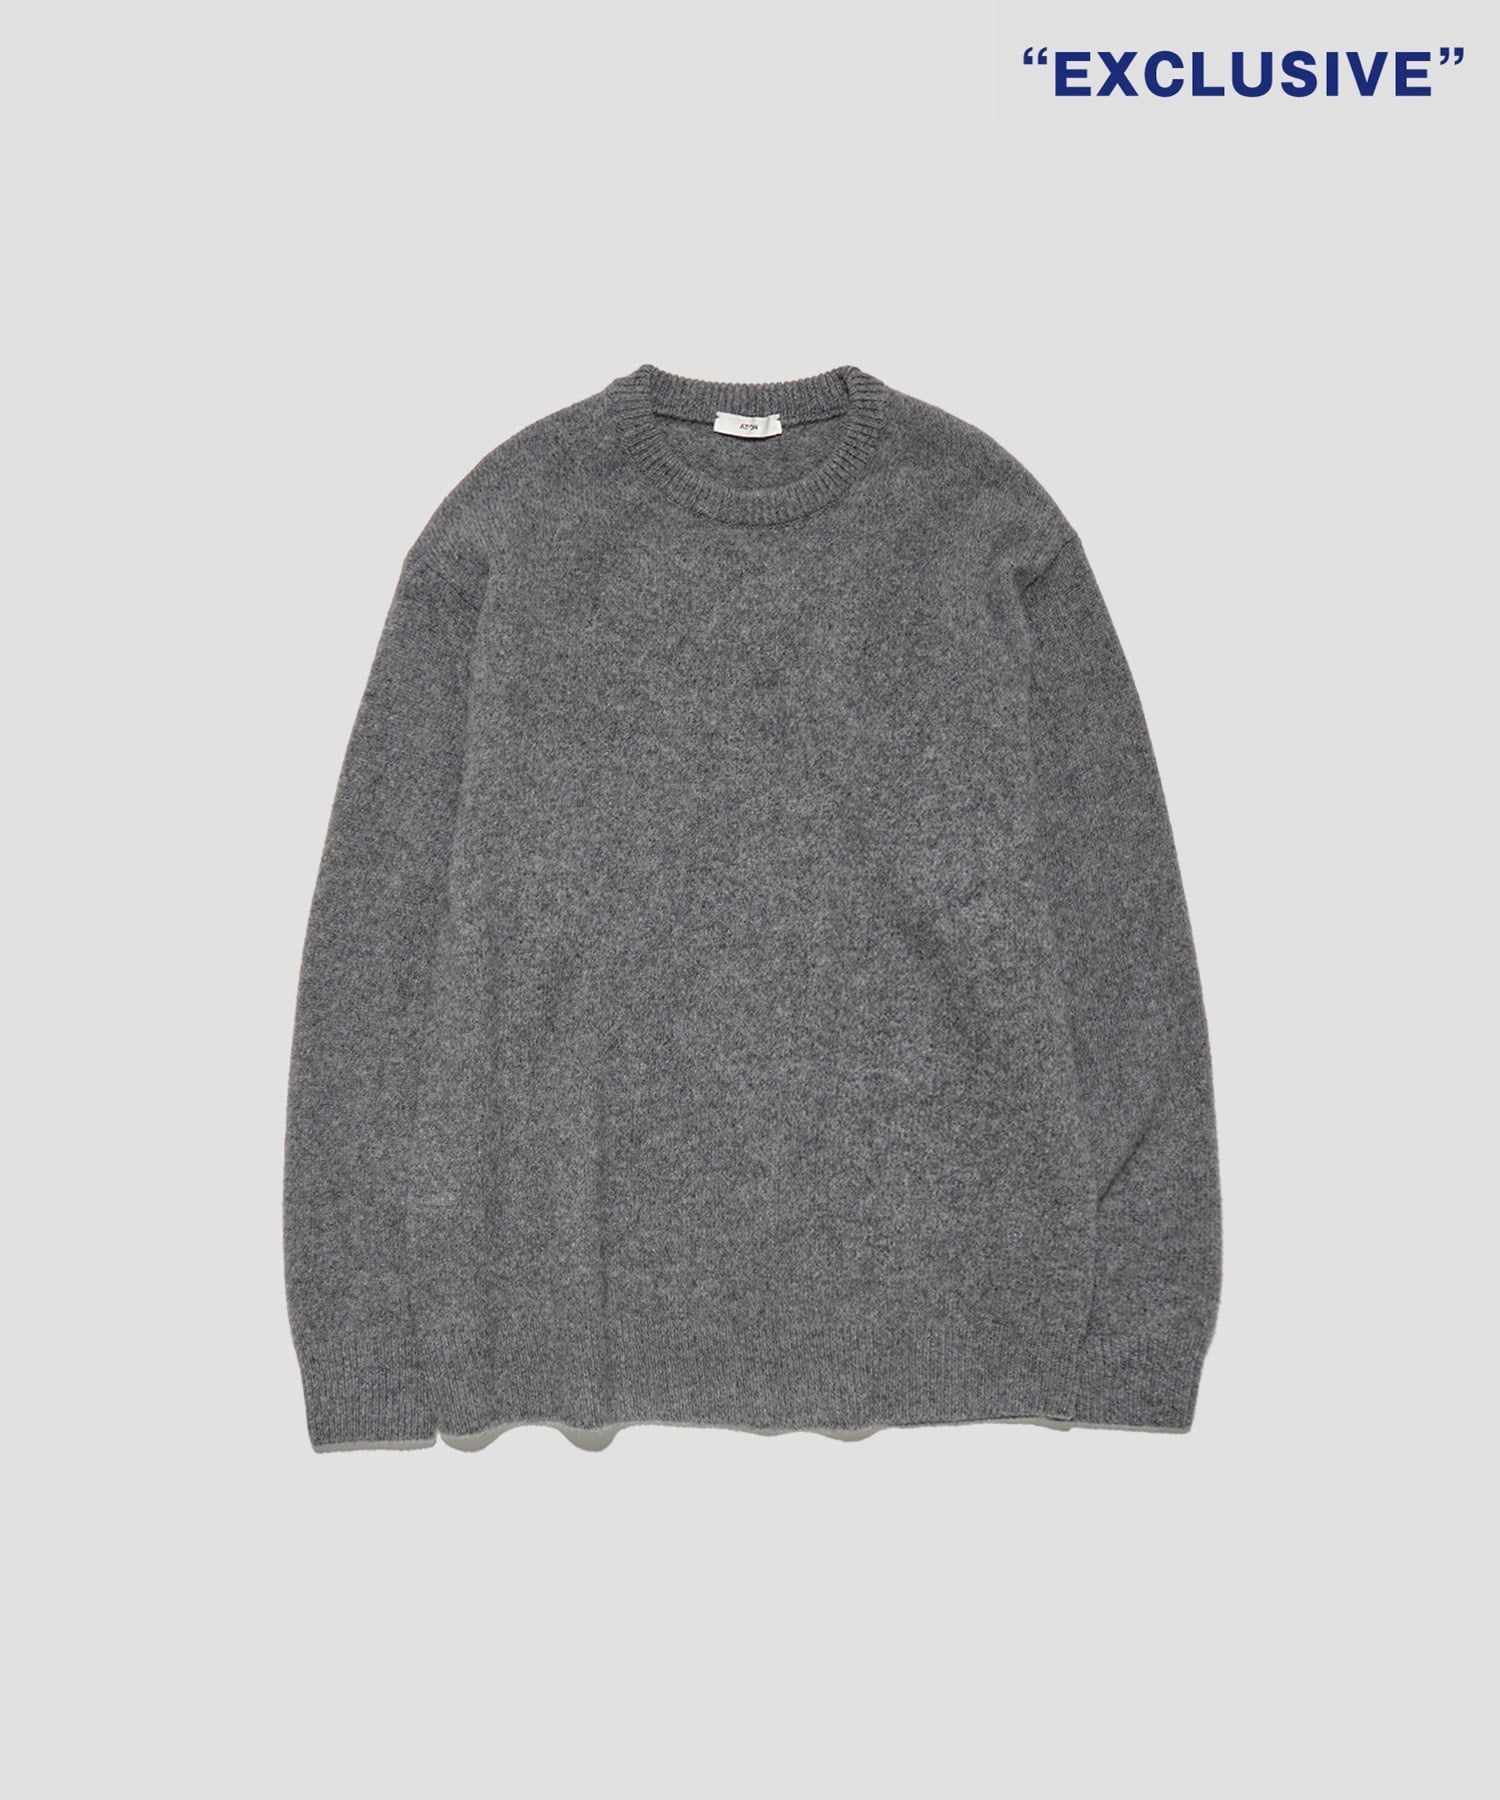 EX. COOMA LAMBS WOOL KNIT PO